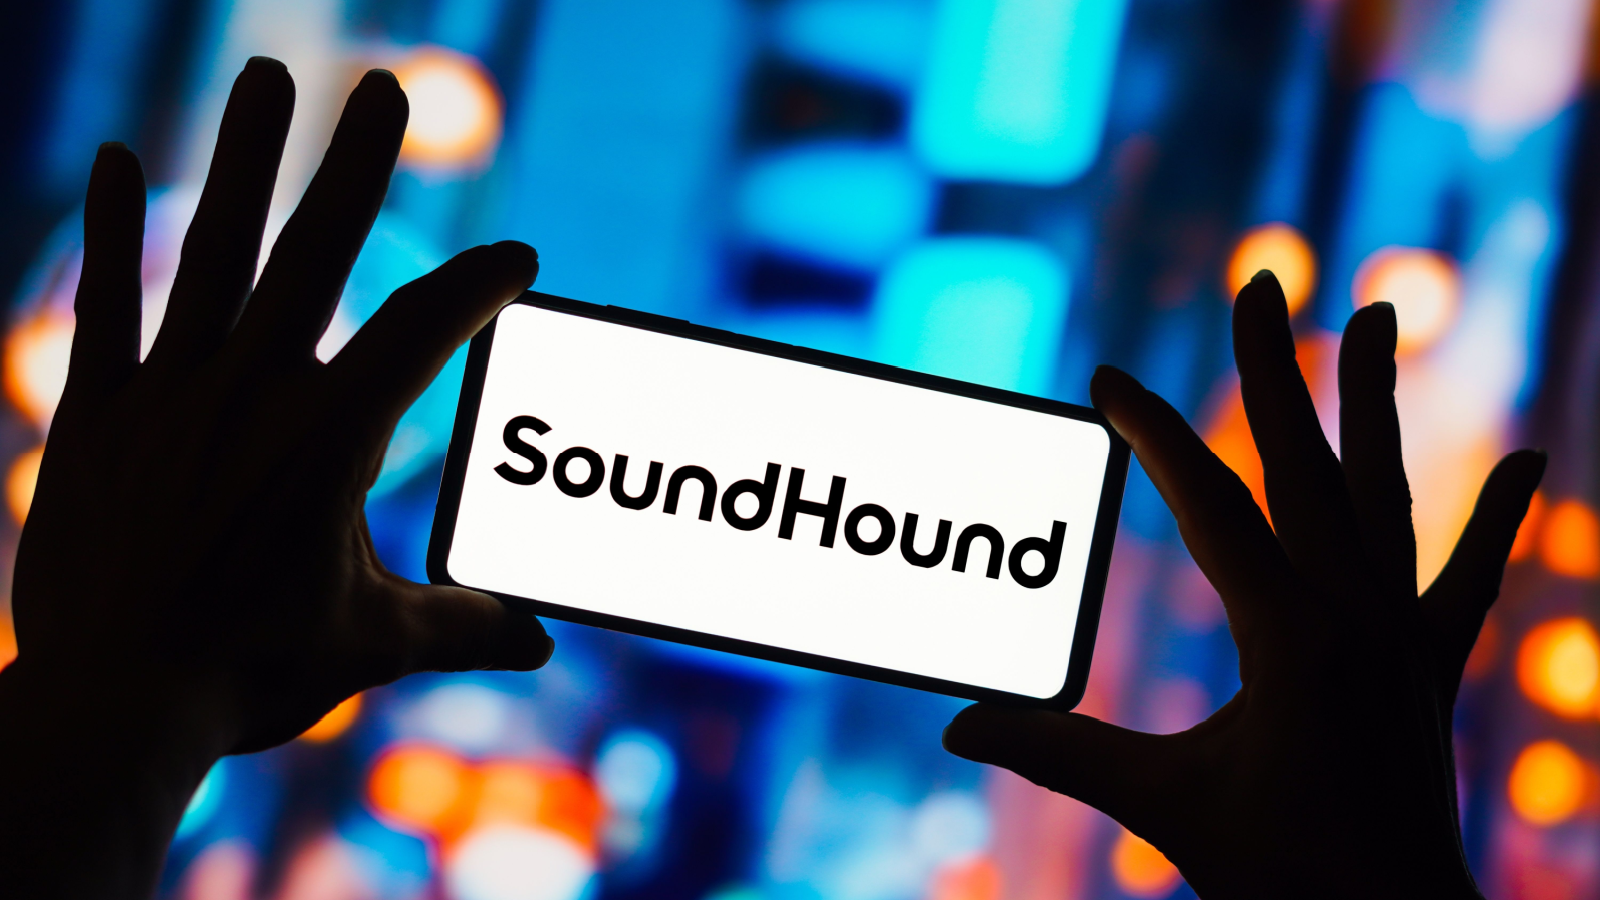 SoundHound AI Stock Doubles in 6 Months. Still a Buy?